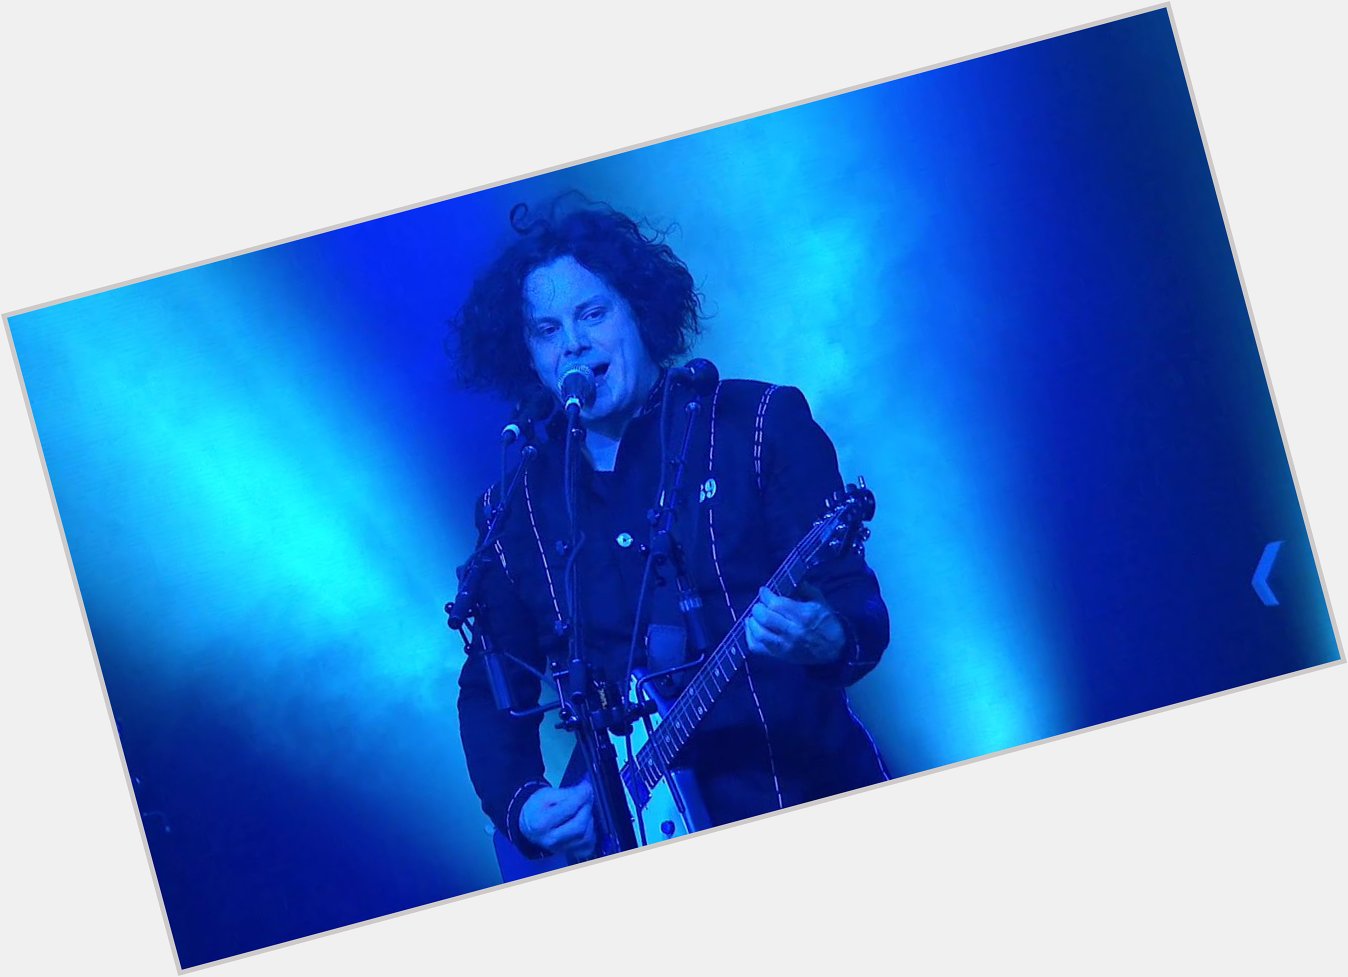 Happy birthday to one of my favorite musicians, Jack White! 